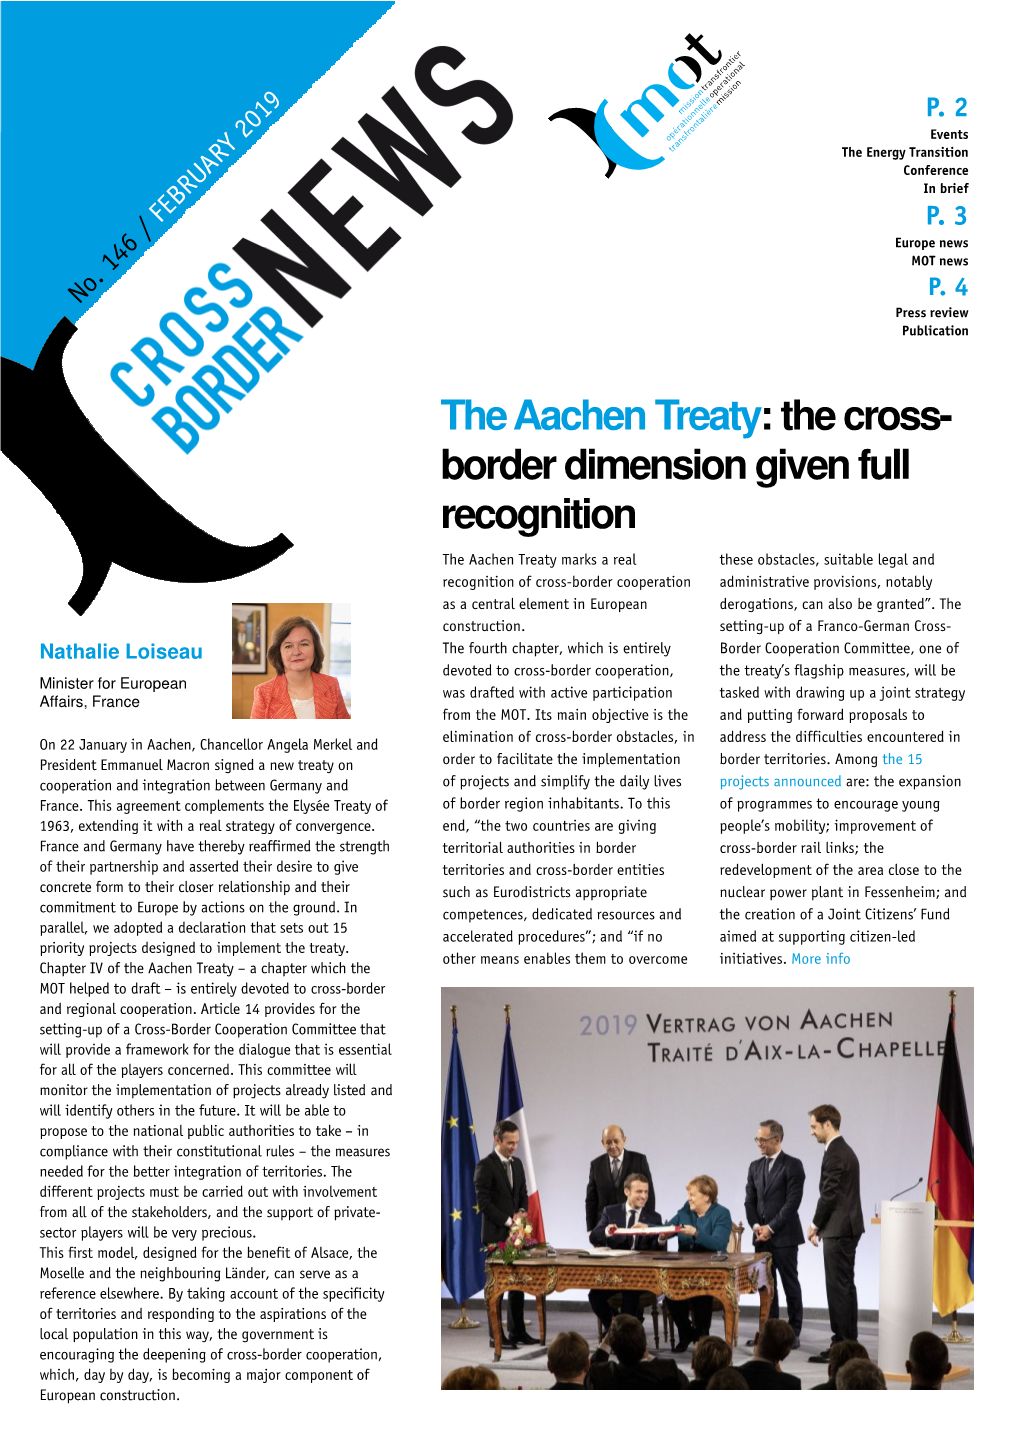 The Aachen Treaty : the Cross- Border Dimension Given Full Recognition